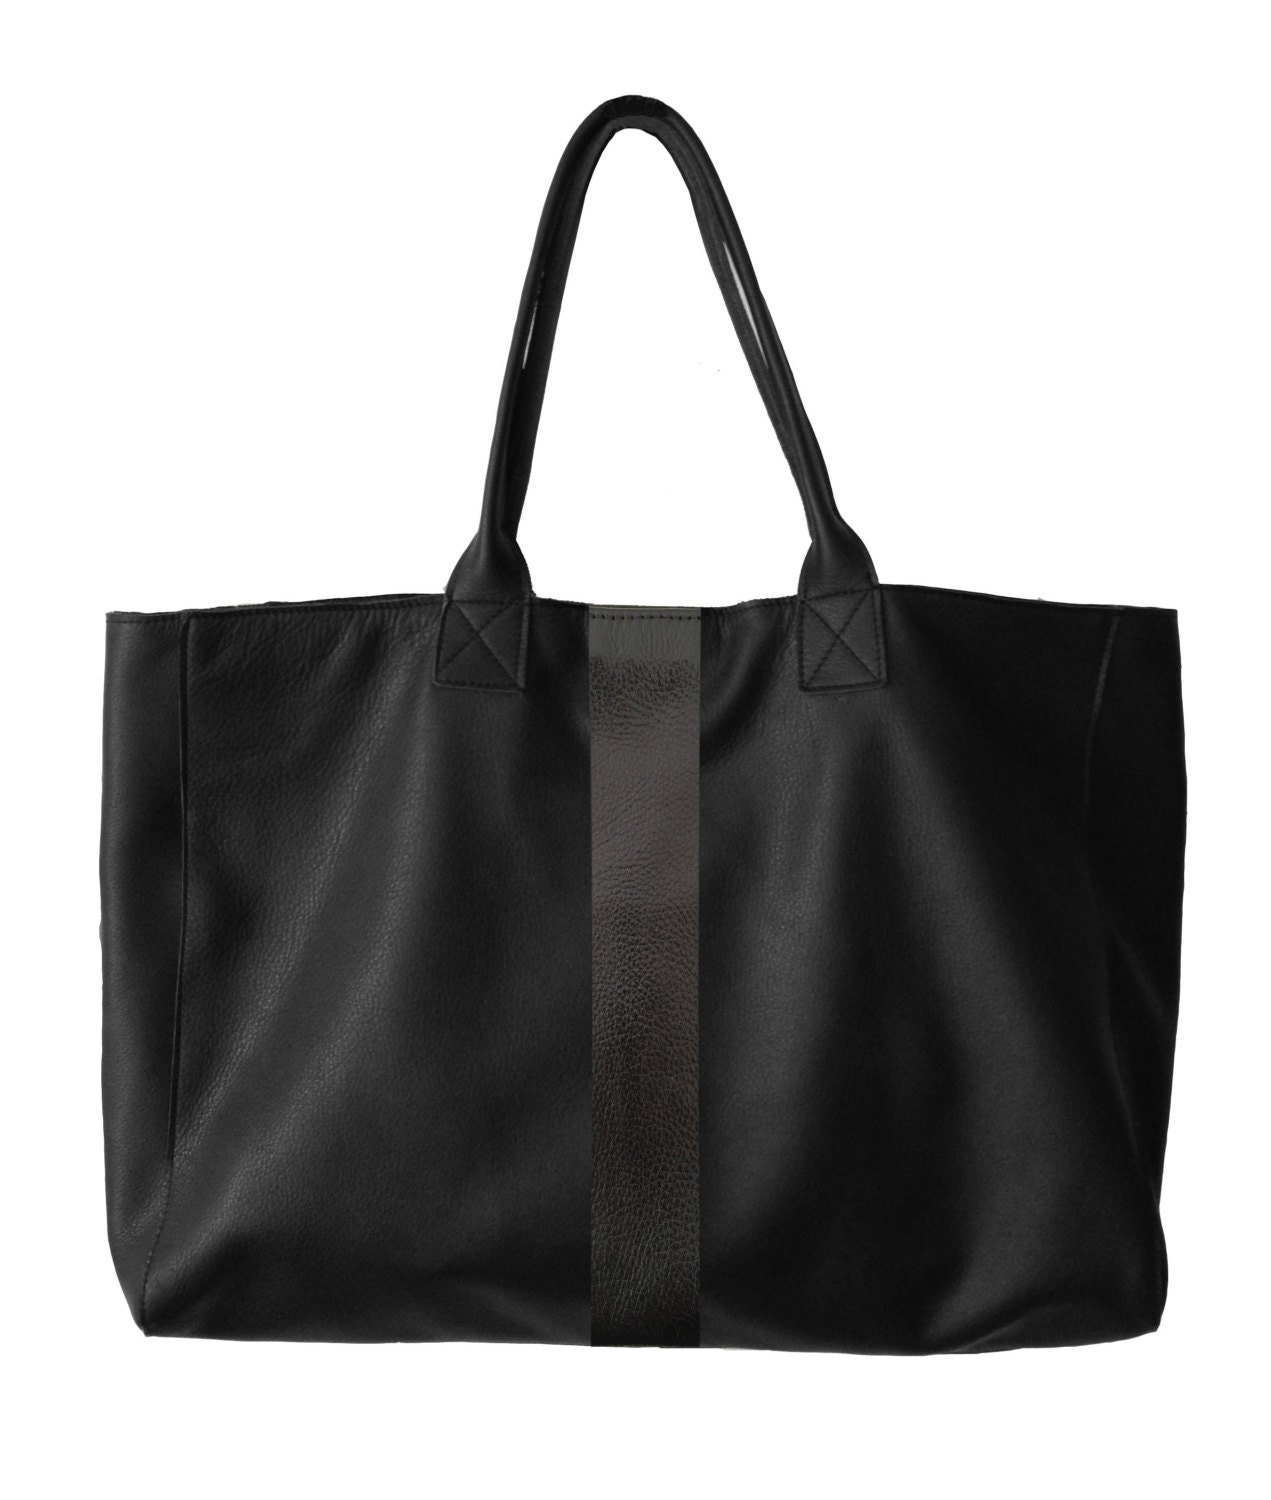 Black on Black JAKE Tote in Black Leather with thick center